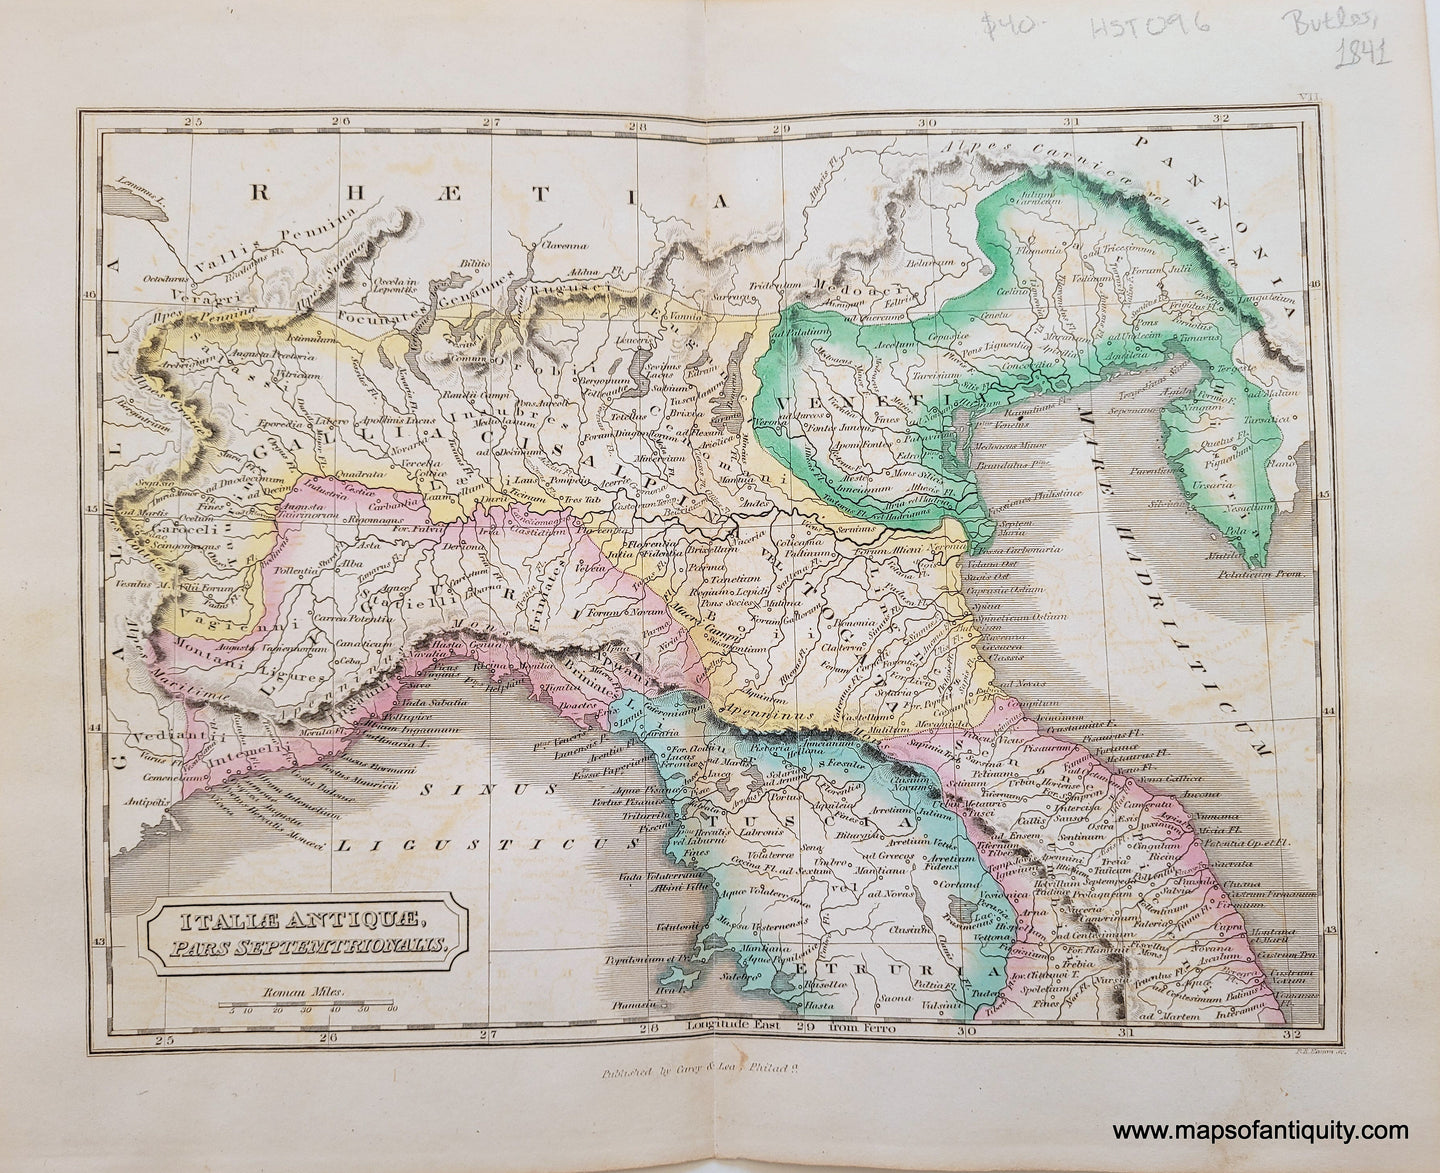 Antique-Hand-Colored-Map-Italie-Antiquae-Pars-Septentrionalis-Ancient-Italy-1841-Butler-Maps-Of-Antiquity